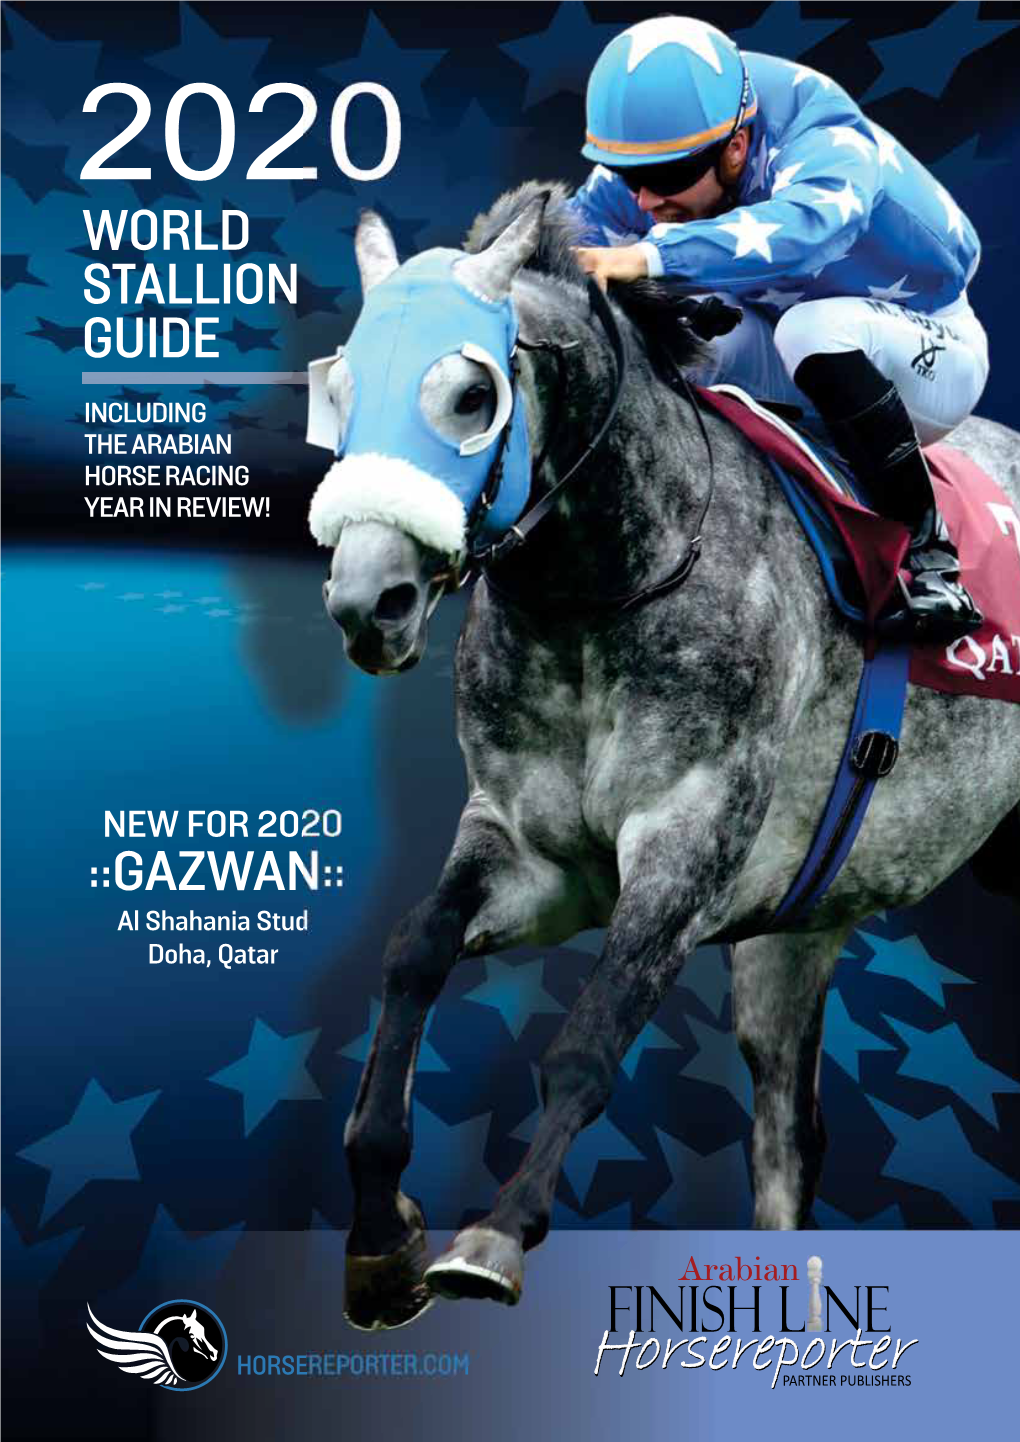 World Stallion Guide Including the Arabian Horse Racing Year in Review!